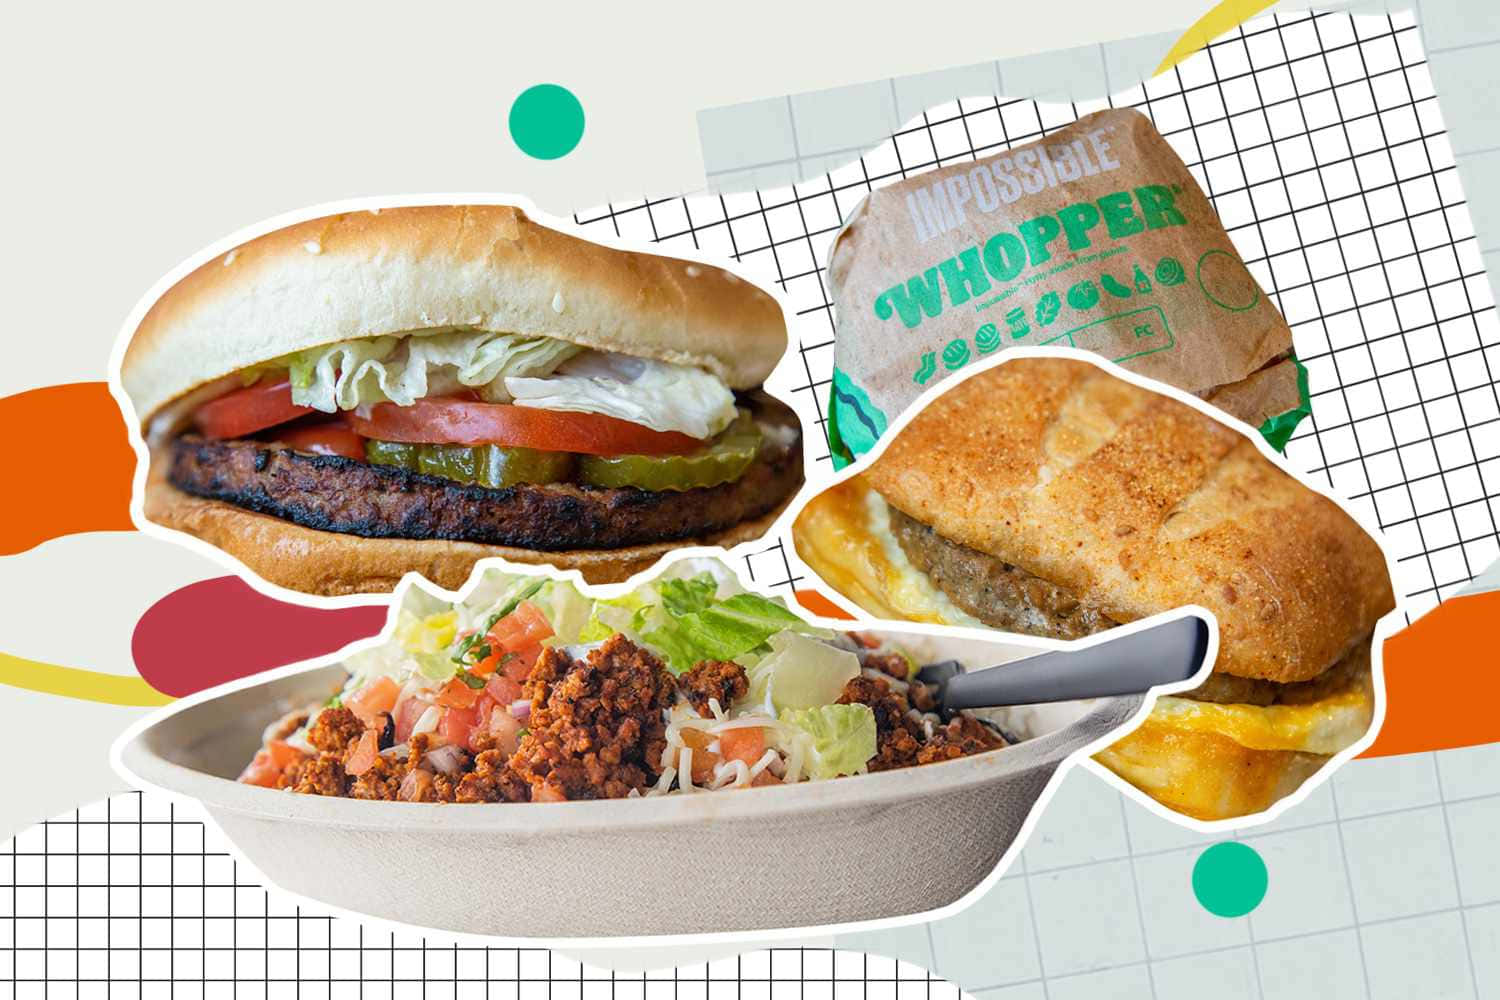 Delicious and satisfying fast food options.